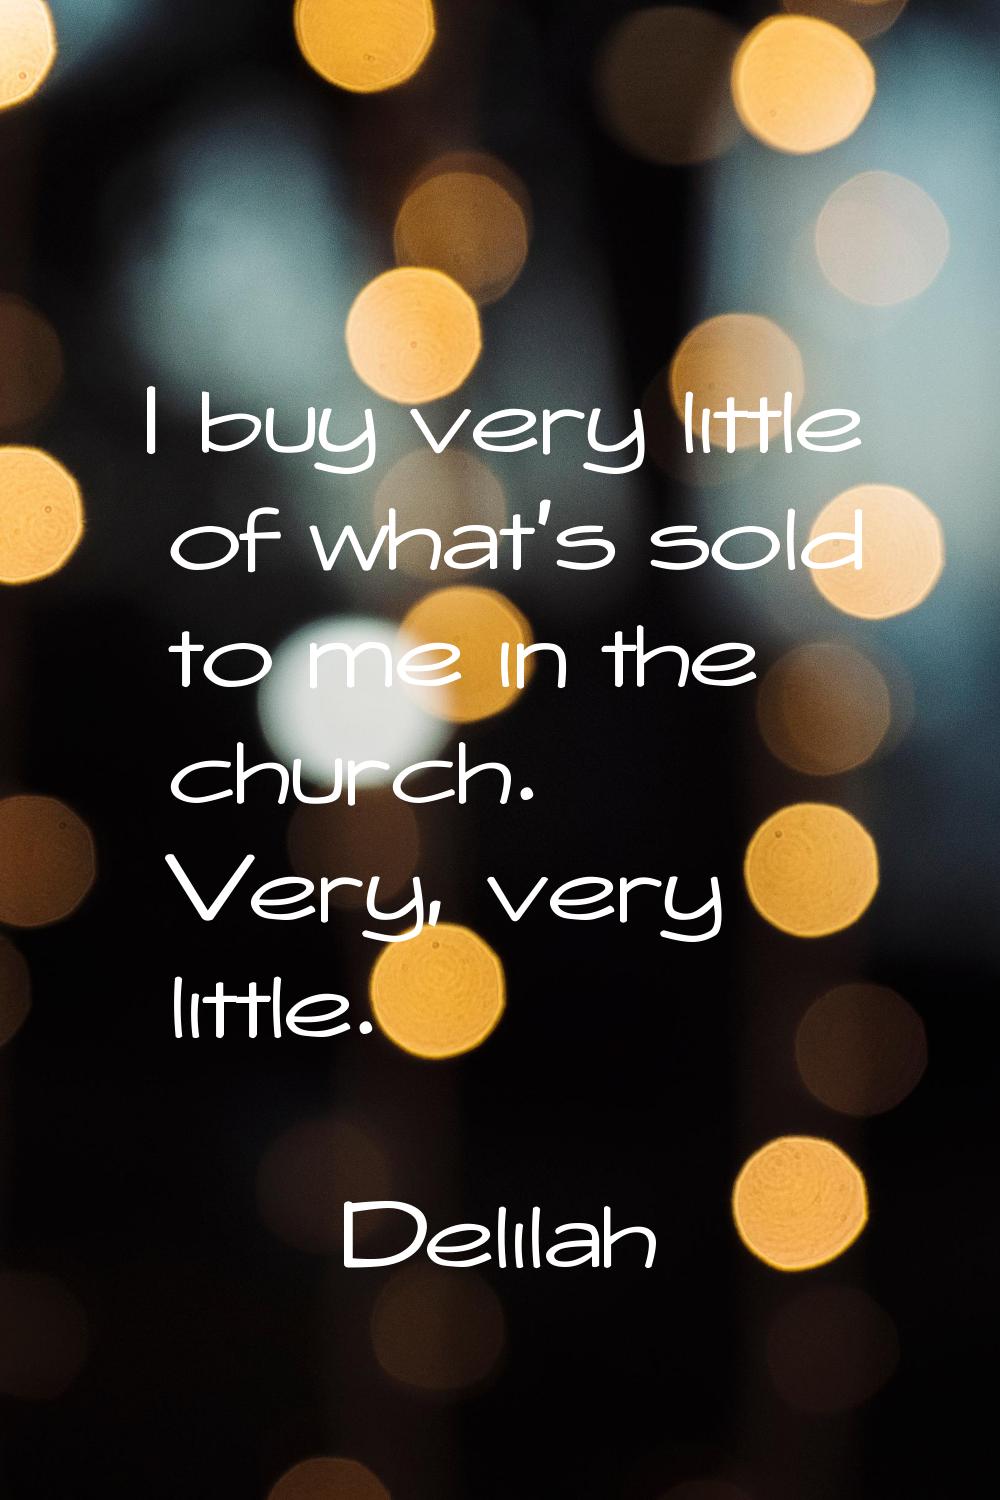 I buy very little of what's sold to me in the church. Very, very little.